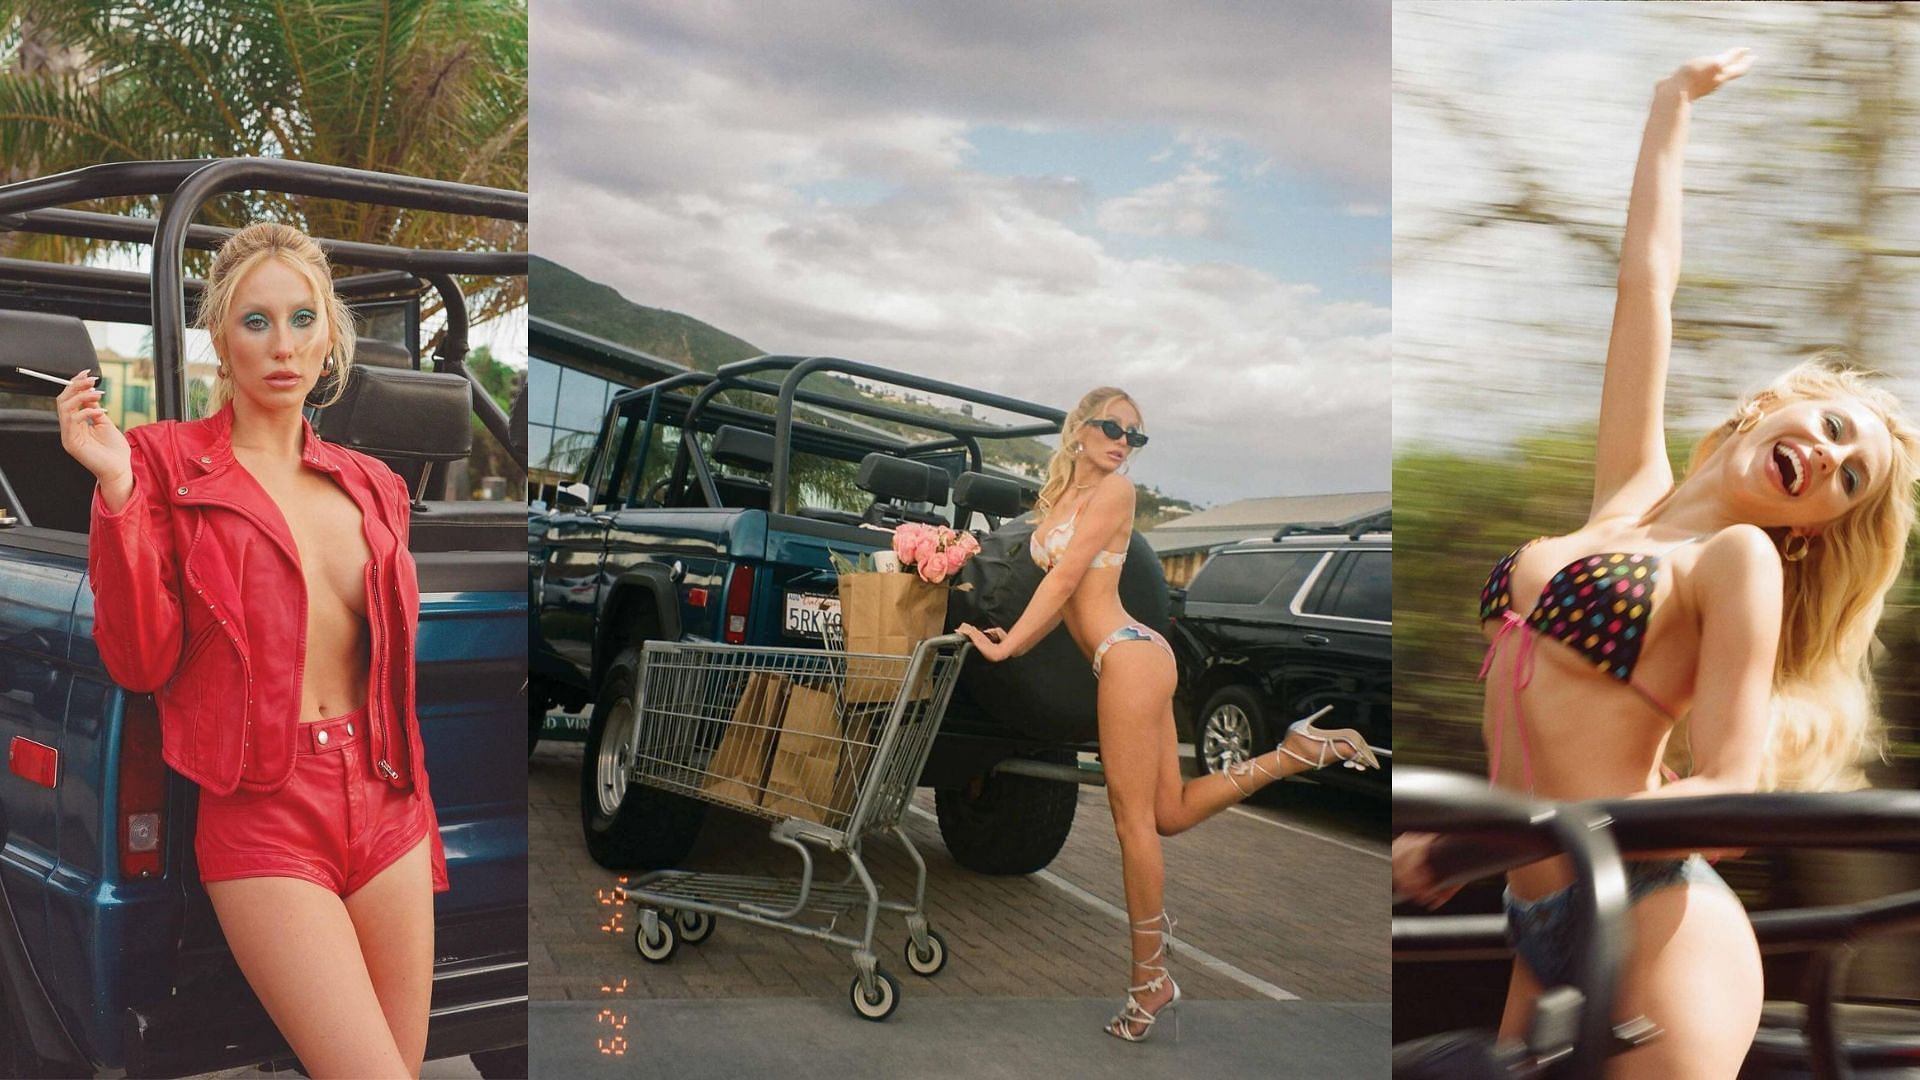 Alix Earle shared photos used in the Flaunt Magazine feature story about her.